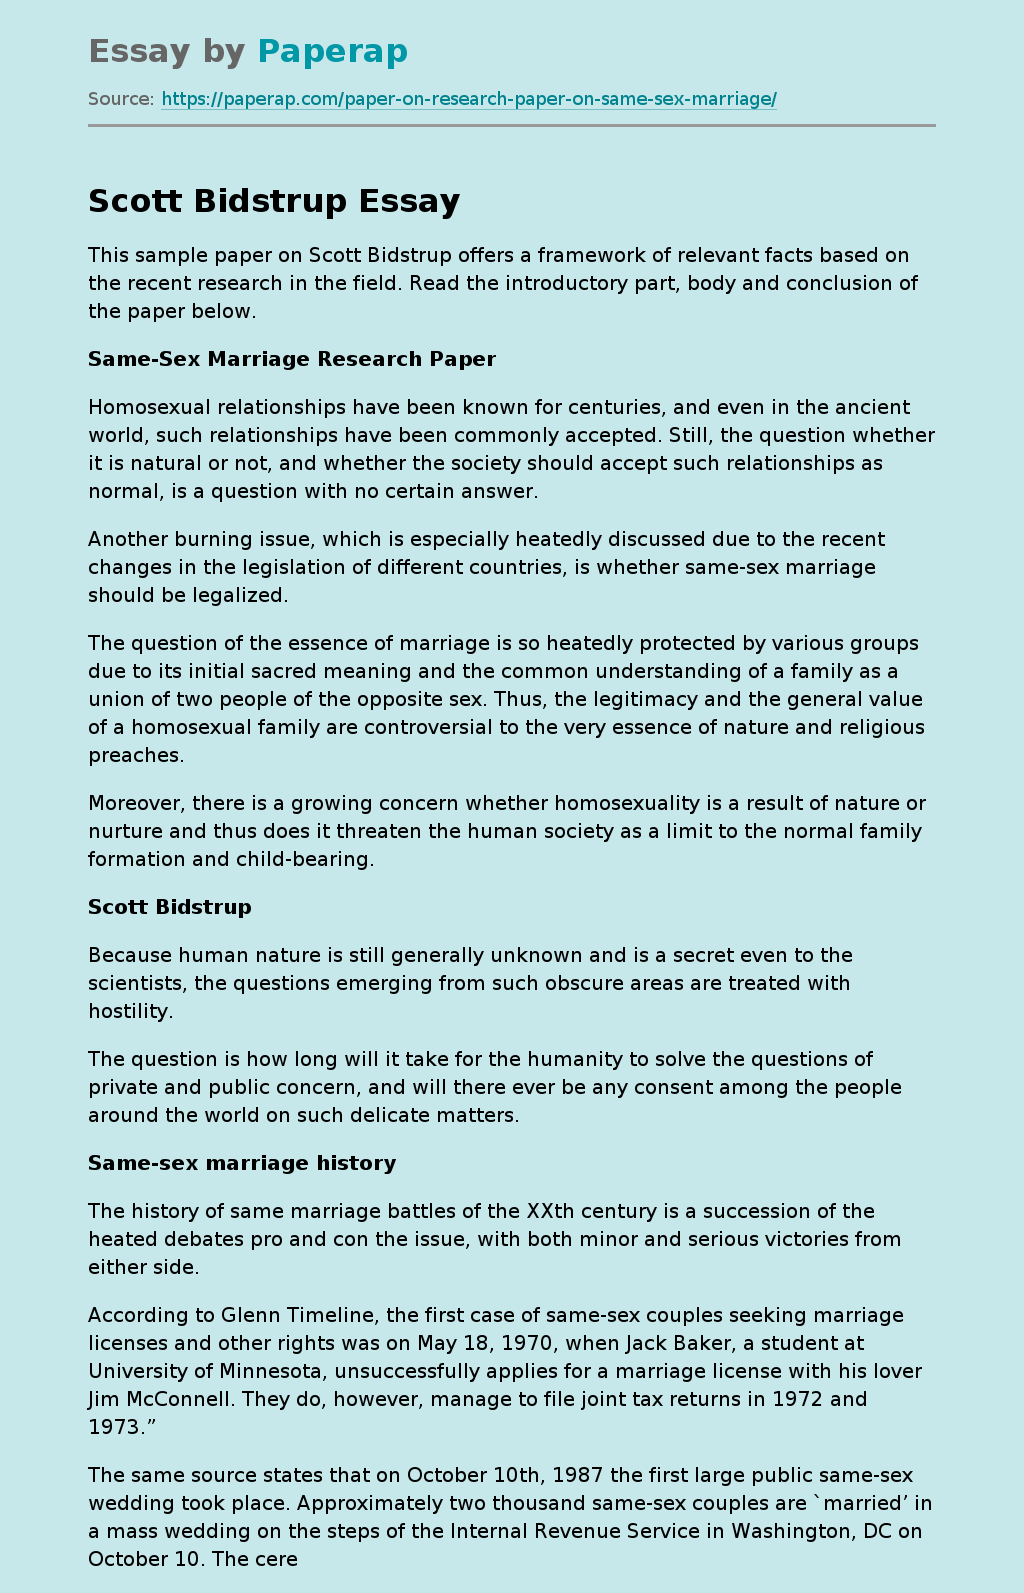 Same-Sex Marriage Research Paper